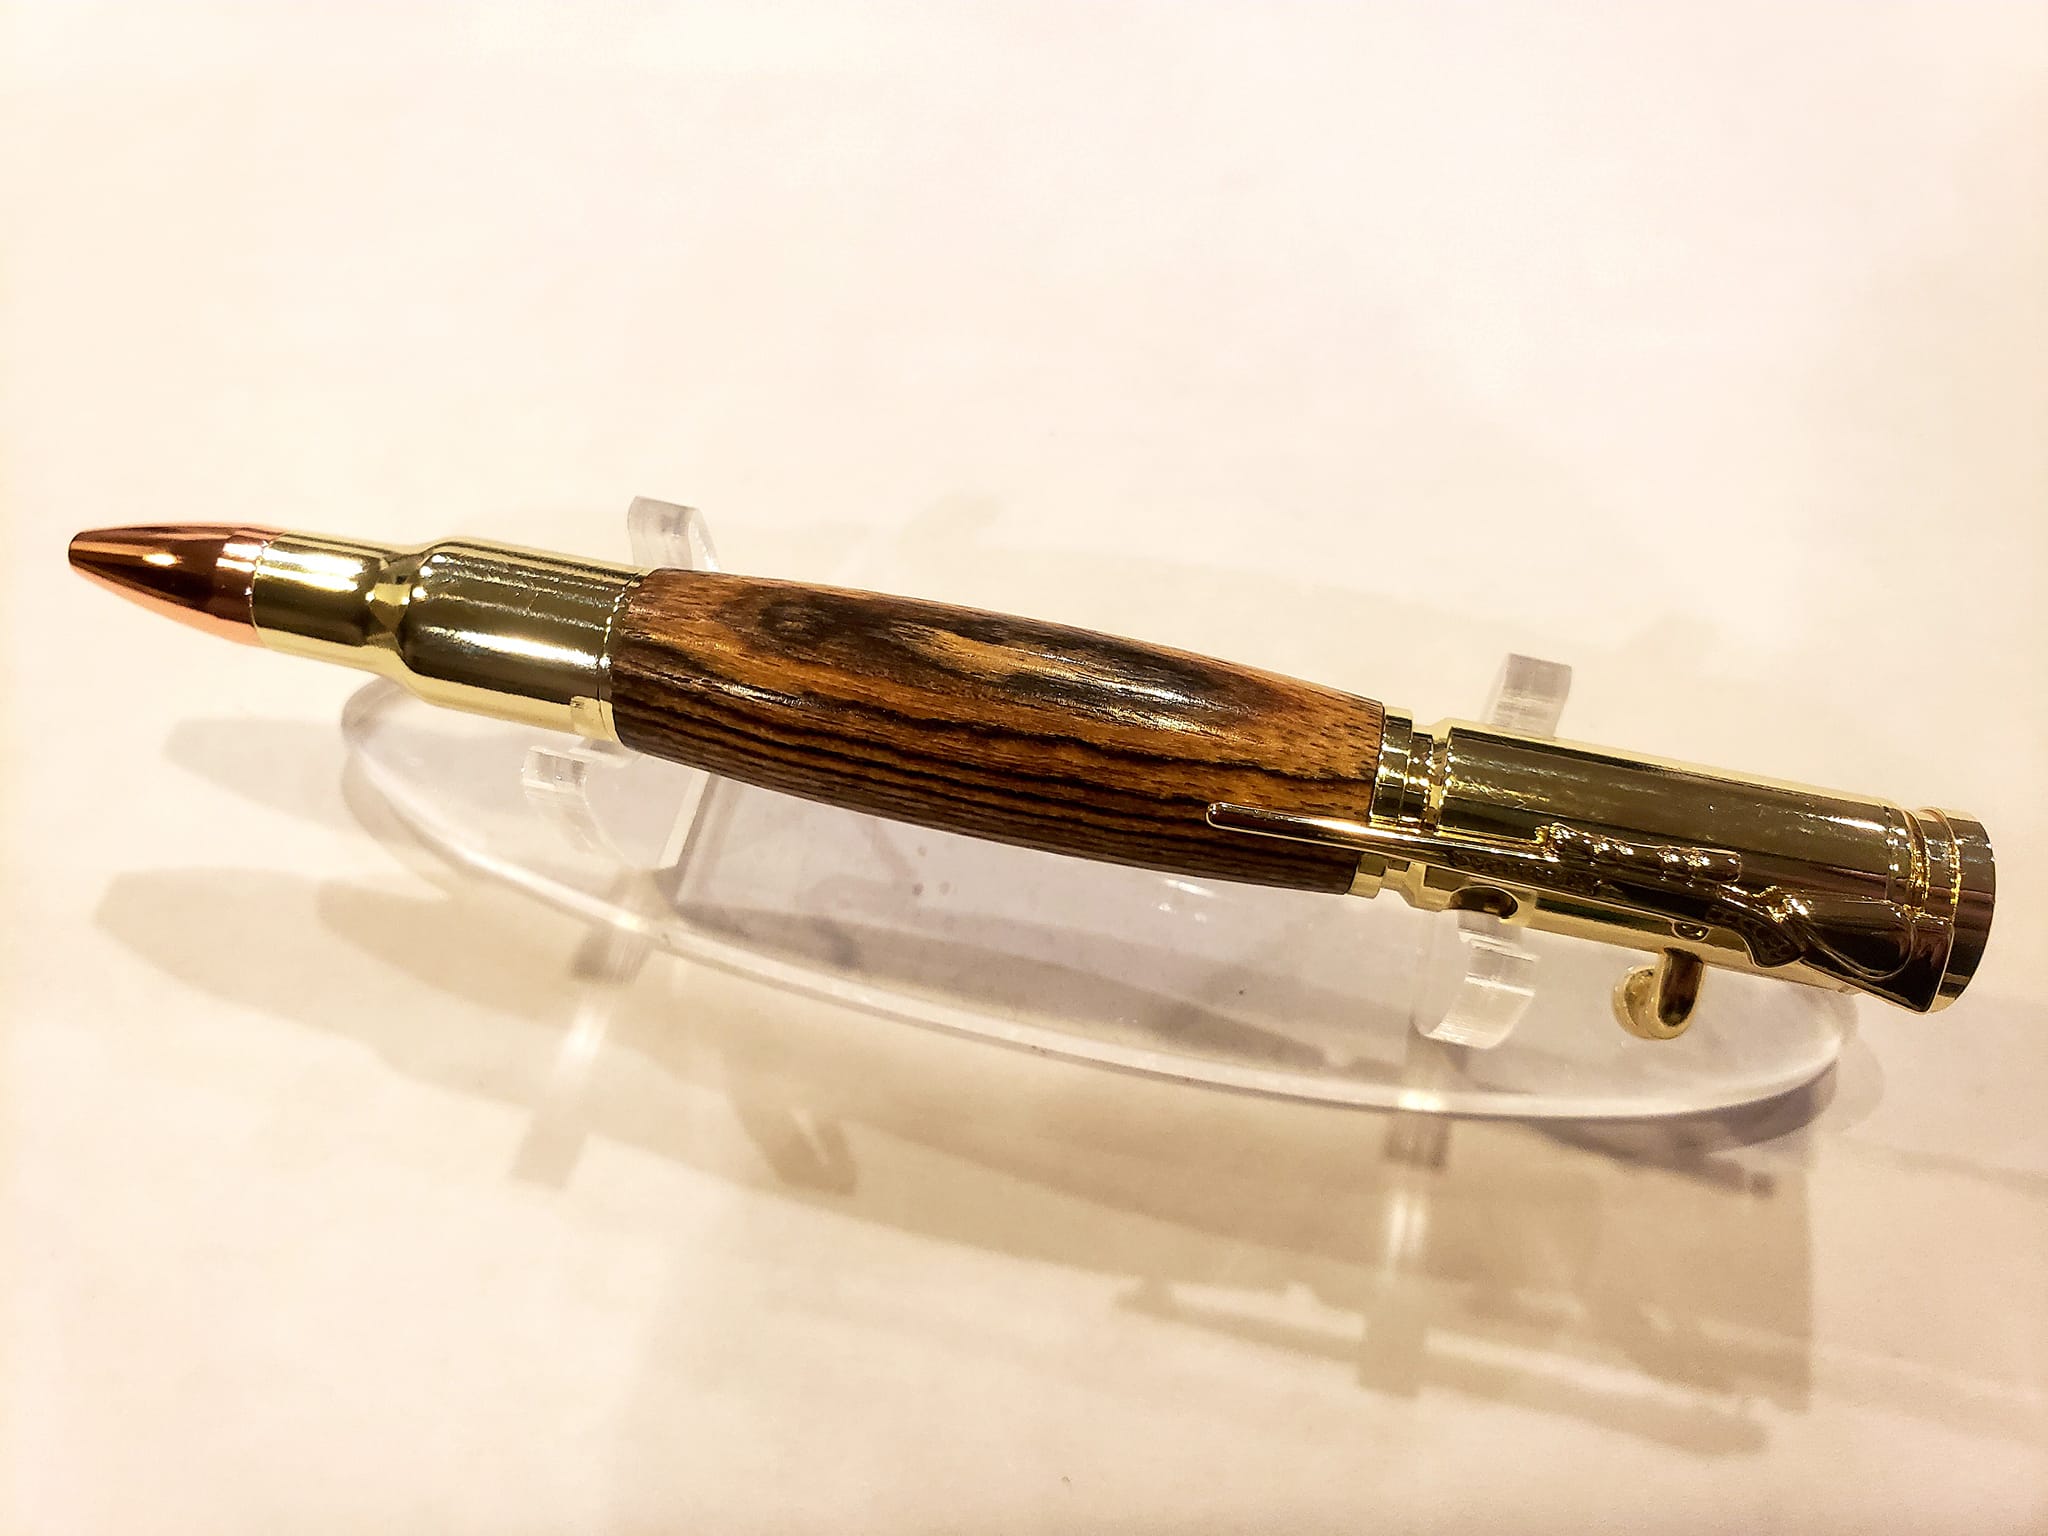 Bolt Action Pen - Brass with Mexico Bocote Wood